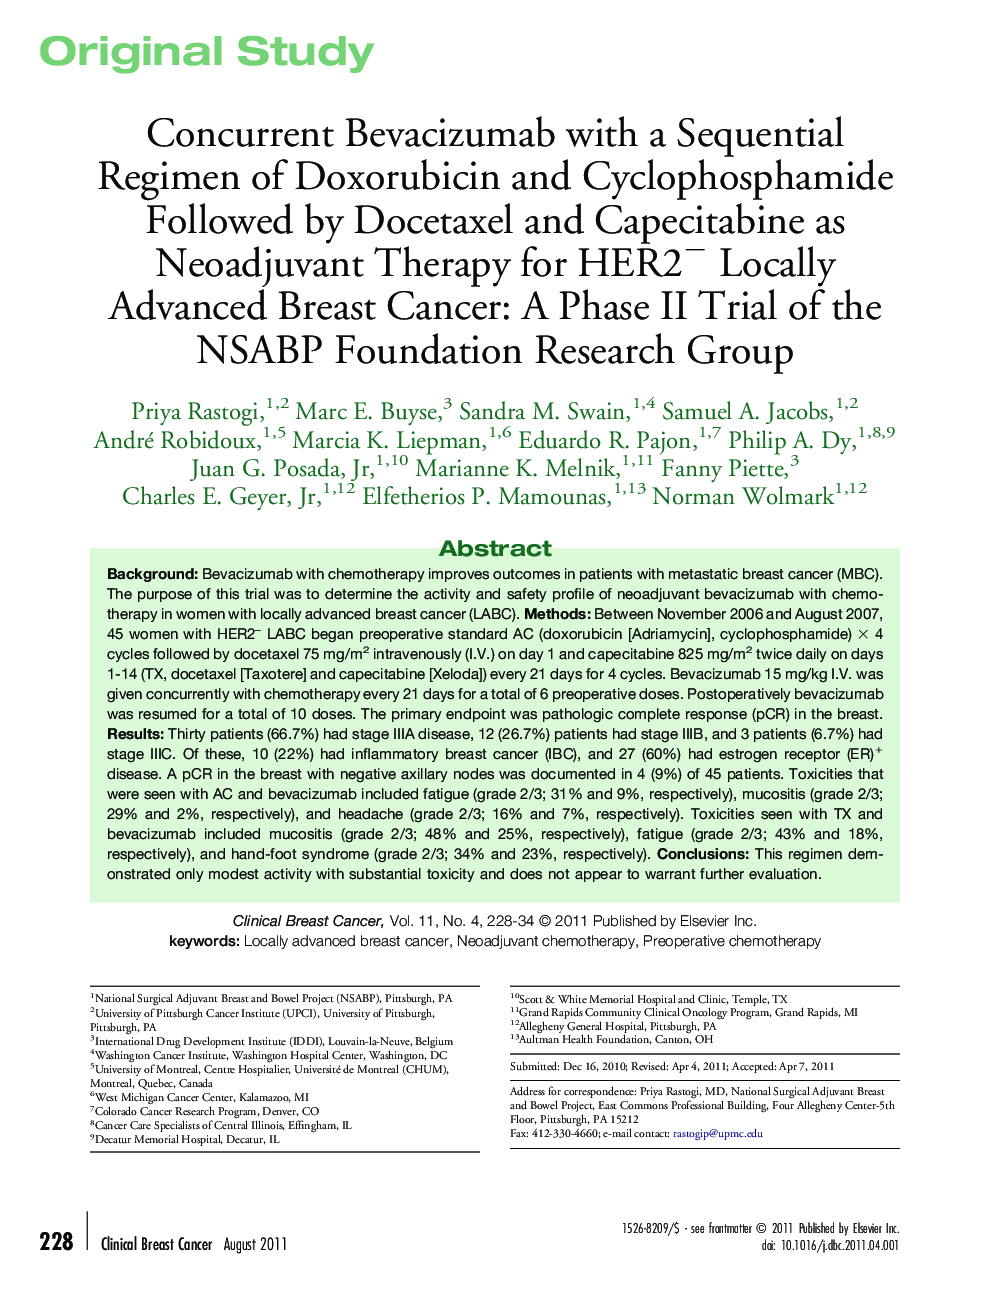 Concurrent Bevacizumab with a Sequential Regimen of Doxorubicin and Cyclophosphamide Followed by Docetaxel and Capecitabine as Neoadjuvant Therapy for HER2− Locally Advanced Breast Cancer: A Phase II Trial of the NSABP Foundation Research Group